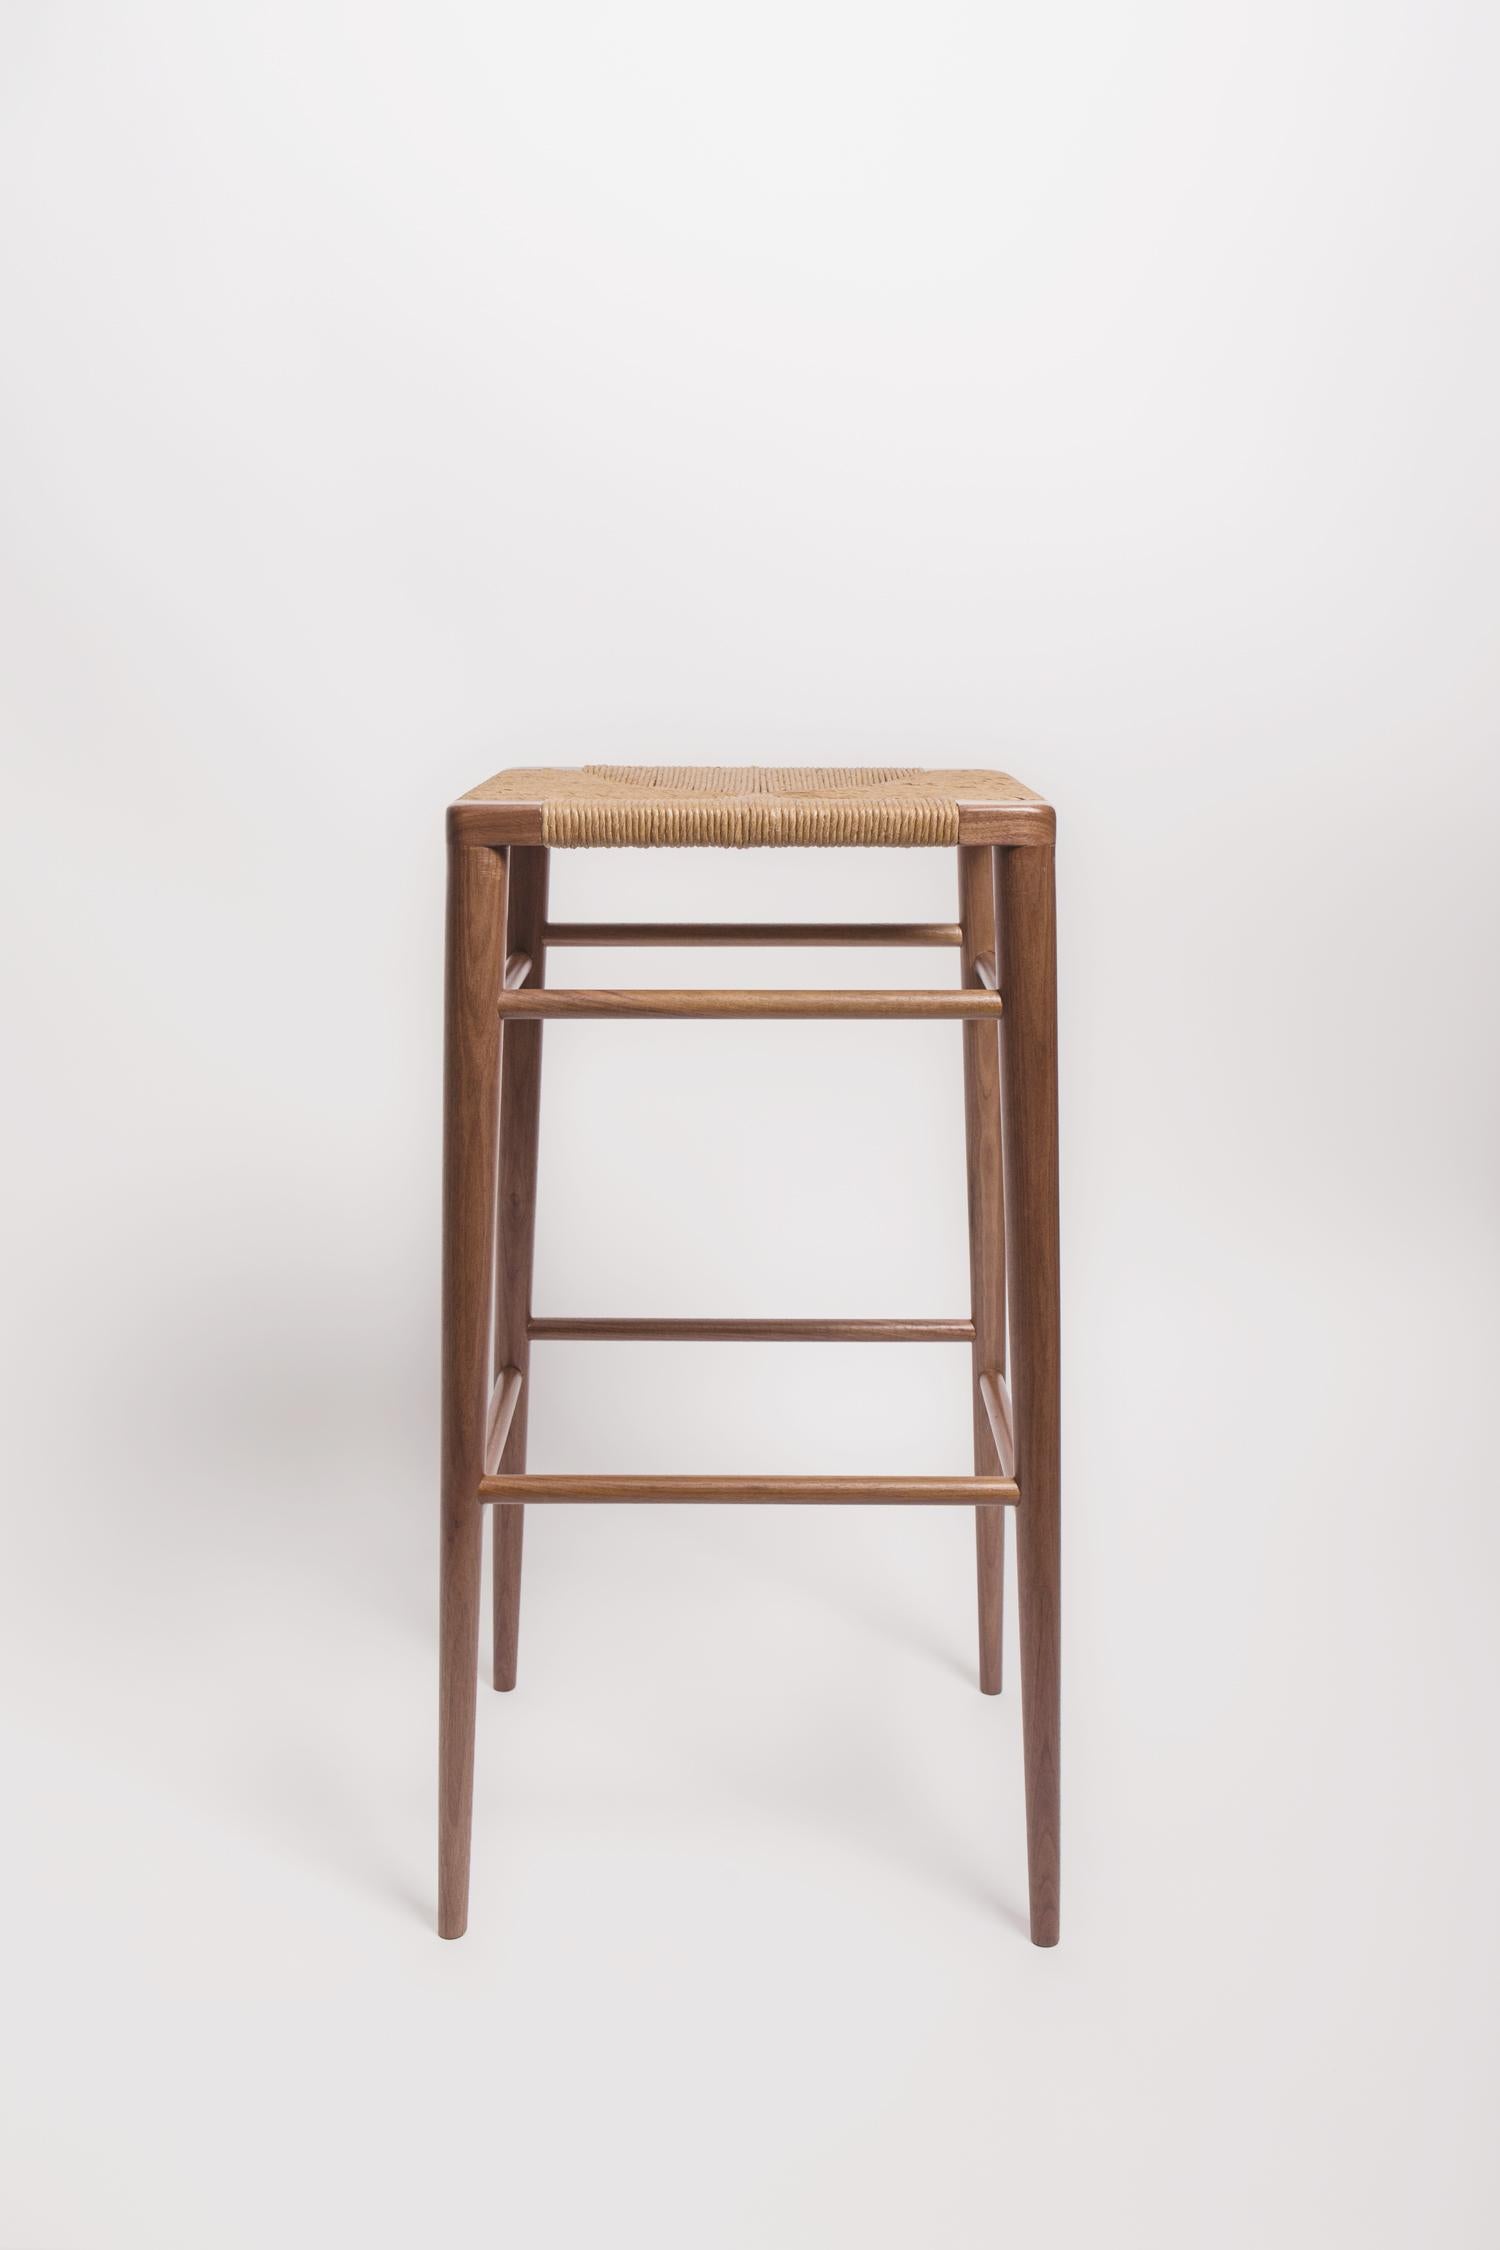 Originally designed by Mel Smilow in 1956 and officially reintroduced by his daughter Judy Smilow in 2013, the Woven Rush Counter Stool is classically midcentury. This collection’s handwoven seating and handcrafted wooden frame provide a comfortable